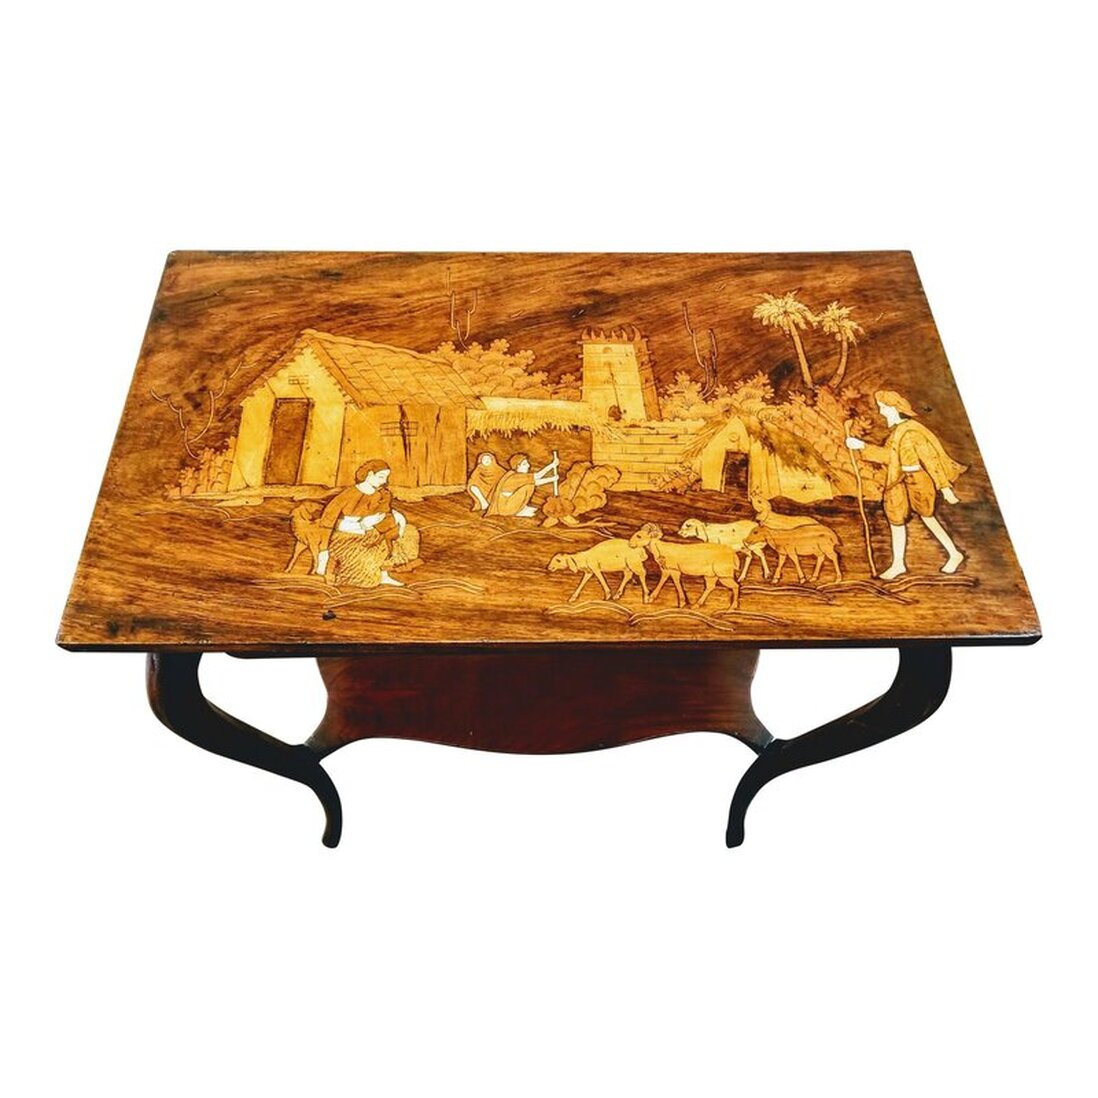 Antique rosewood parlor table with cabriole jambes (French legs that were introduced in French furniture in the late Louis XIV style) and a shaped lower shelf. The top features a sadeli (marquetry) village goat herding scene with a background showing mud architecture and a pair cooking at a pot over a fire. The scene is created with various woods and bone.  Sadeli, or marquetry, is a folk art specialty of craftspeople in Surat, Gujarat, India. Surat was the first headquarters and trading outpost established by the English East India Company in 1608, which led to British Raj in India.